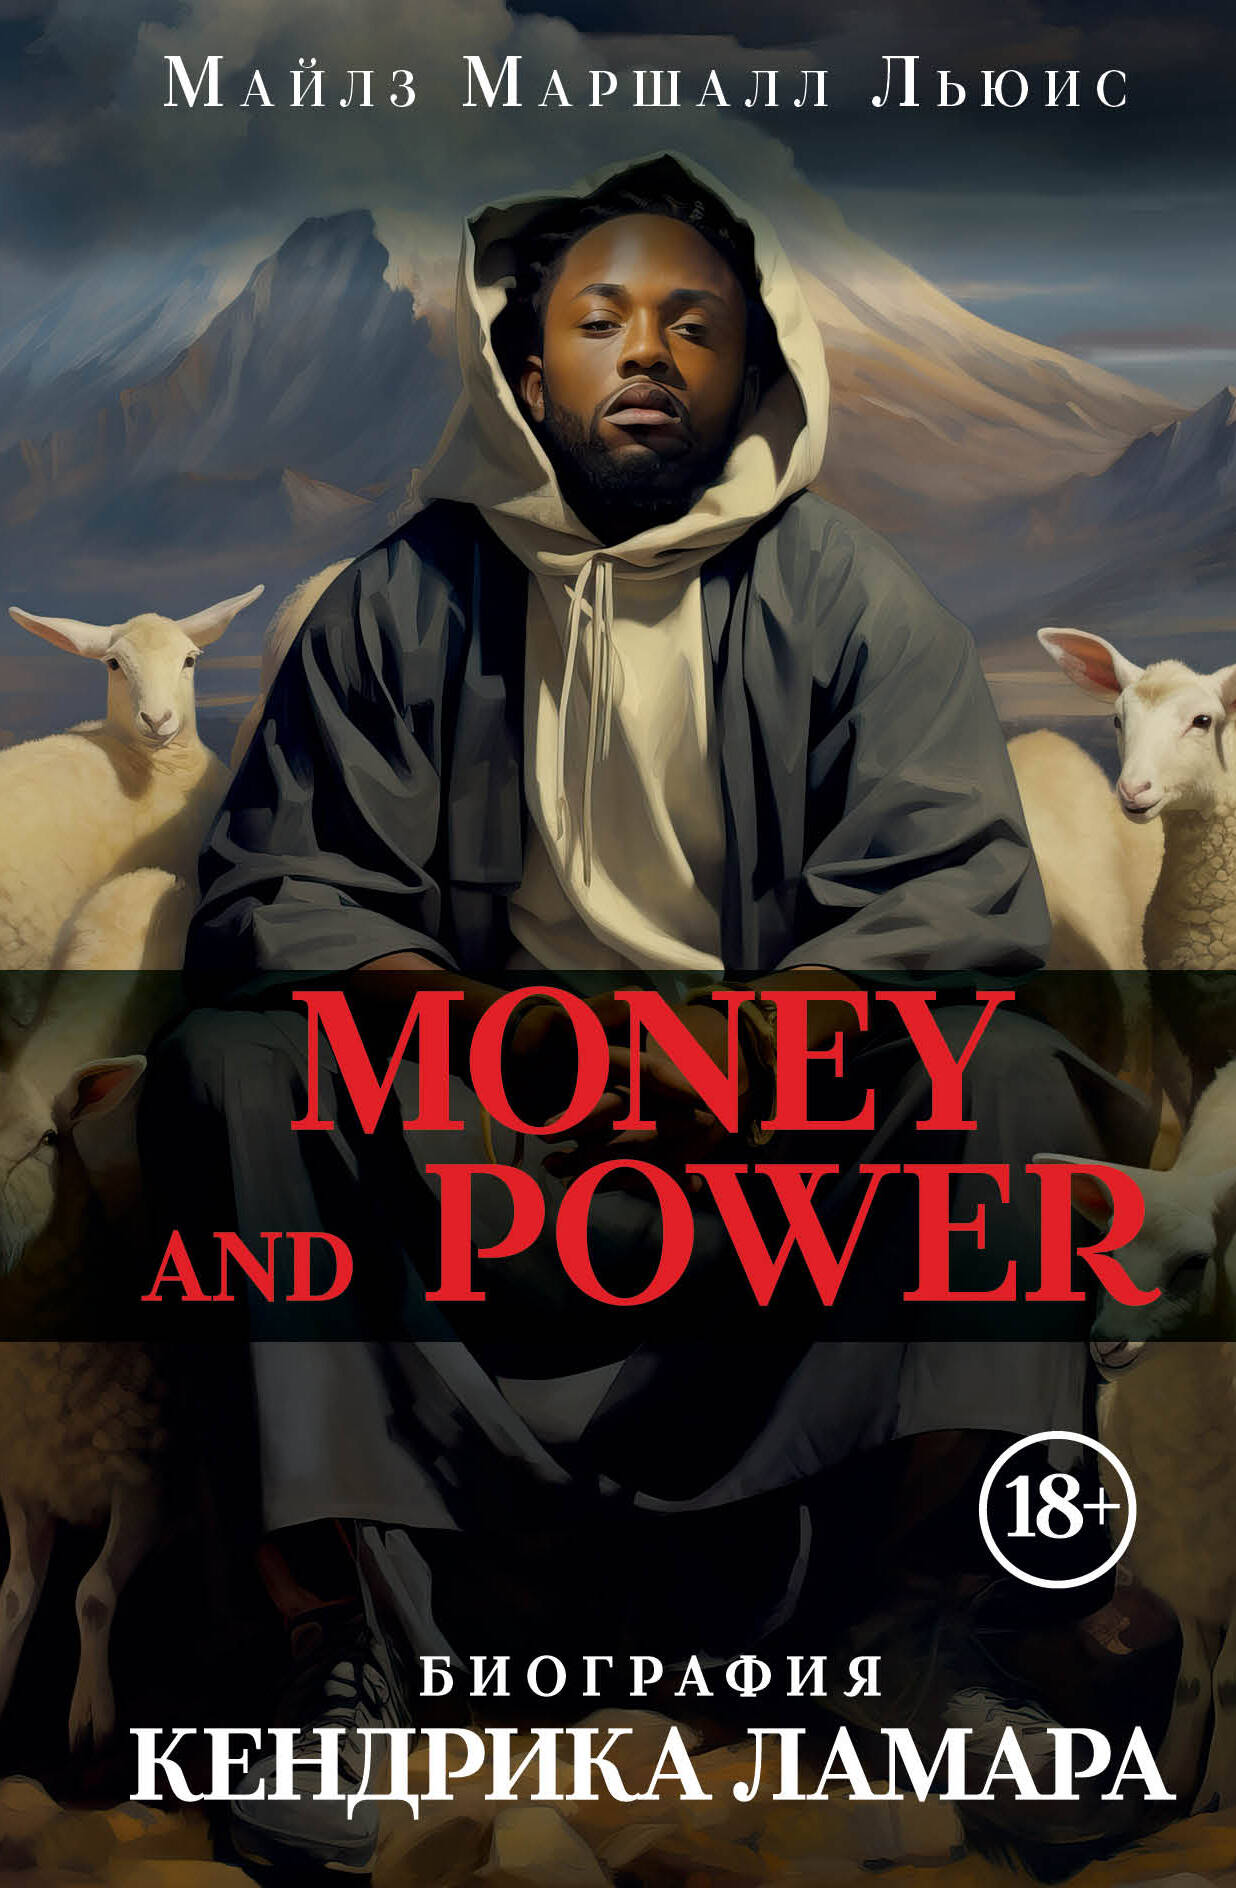 Money and power:   